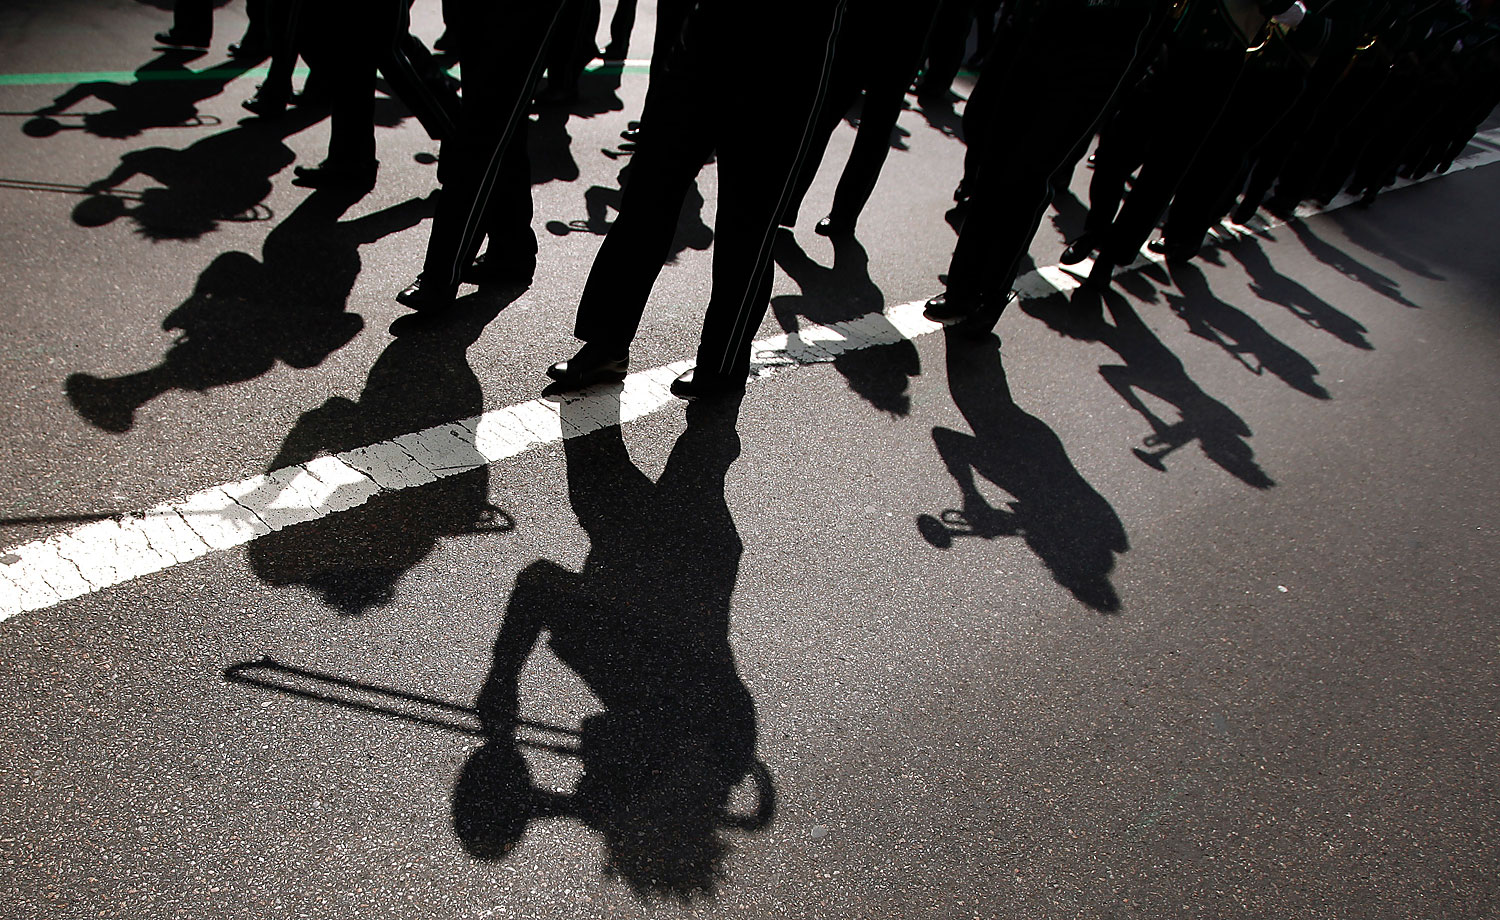 A marching band casts shadows on the road during the 251st annual St. Patrick's Day Parade in New York